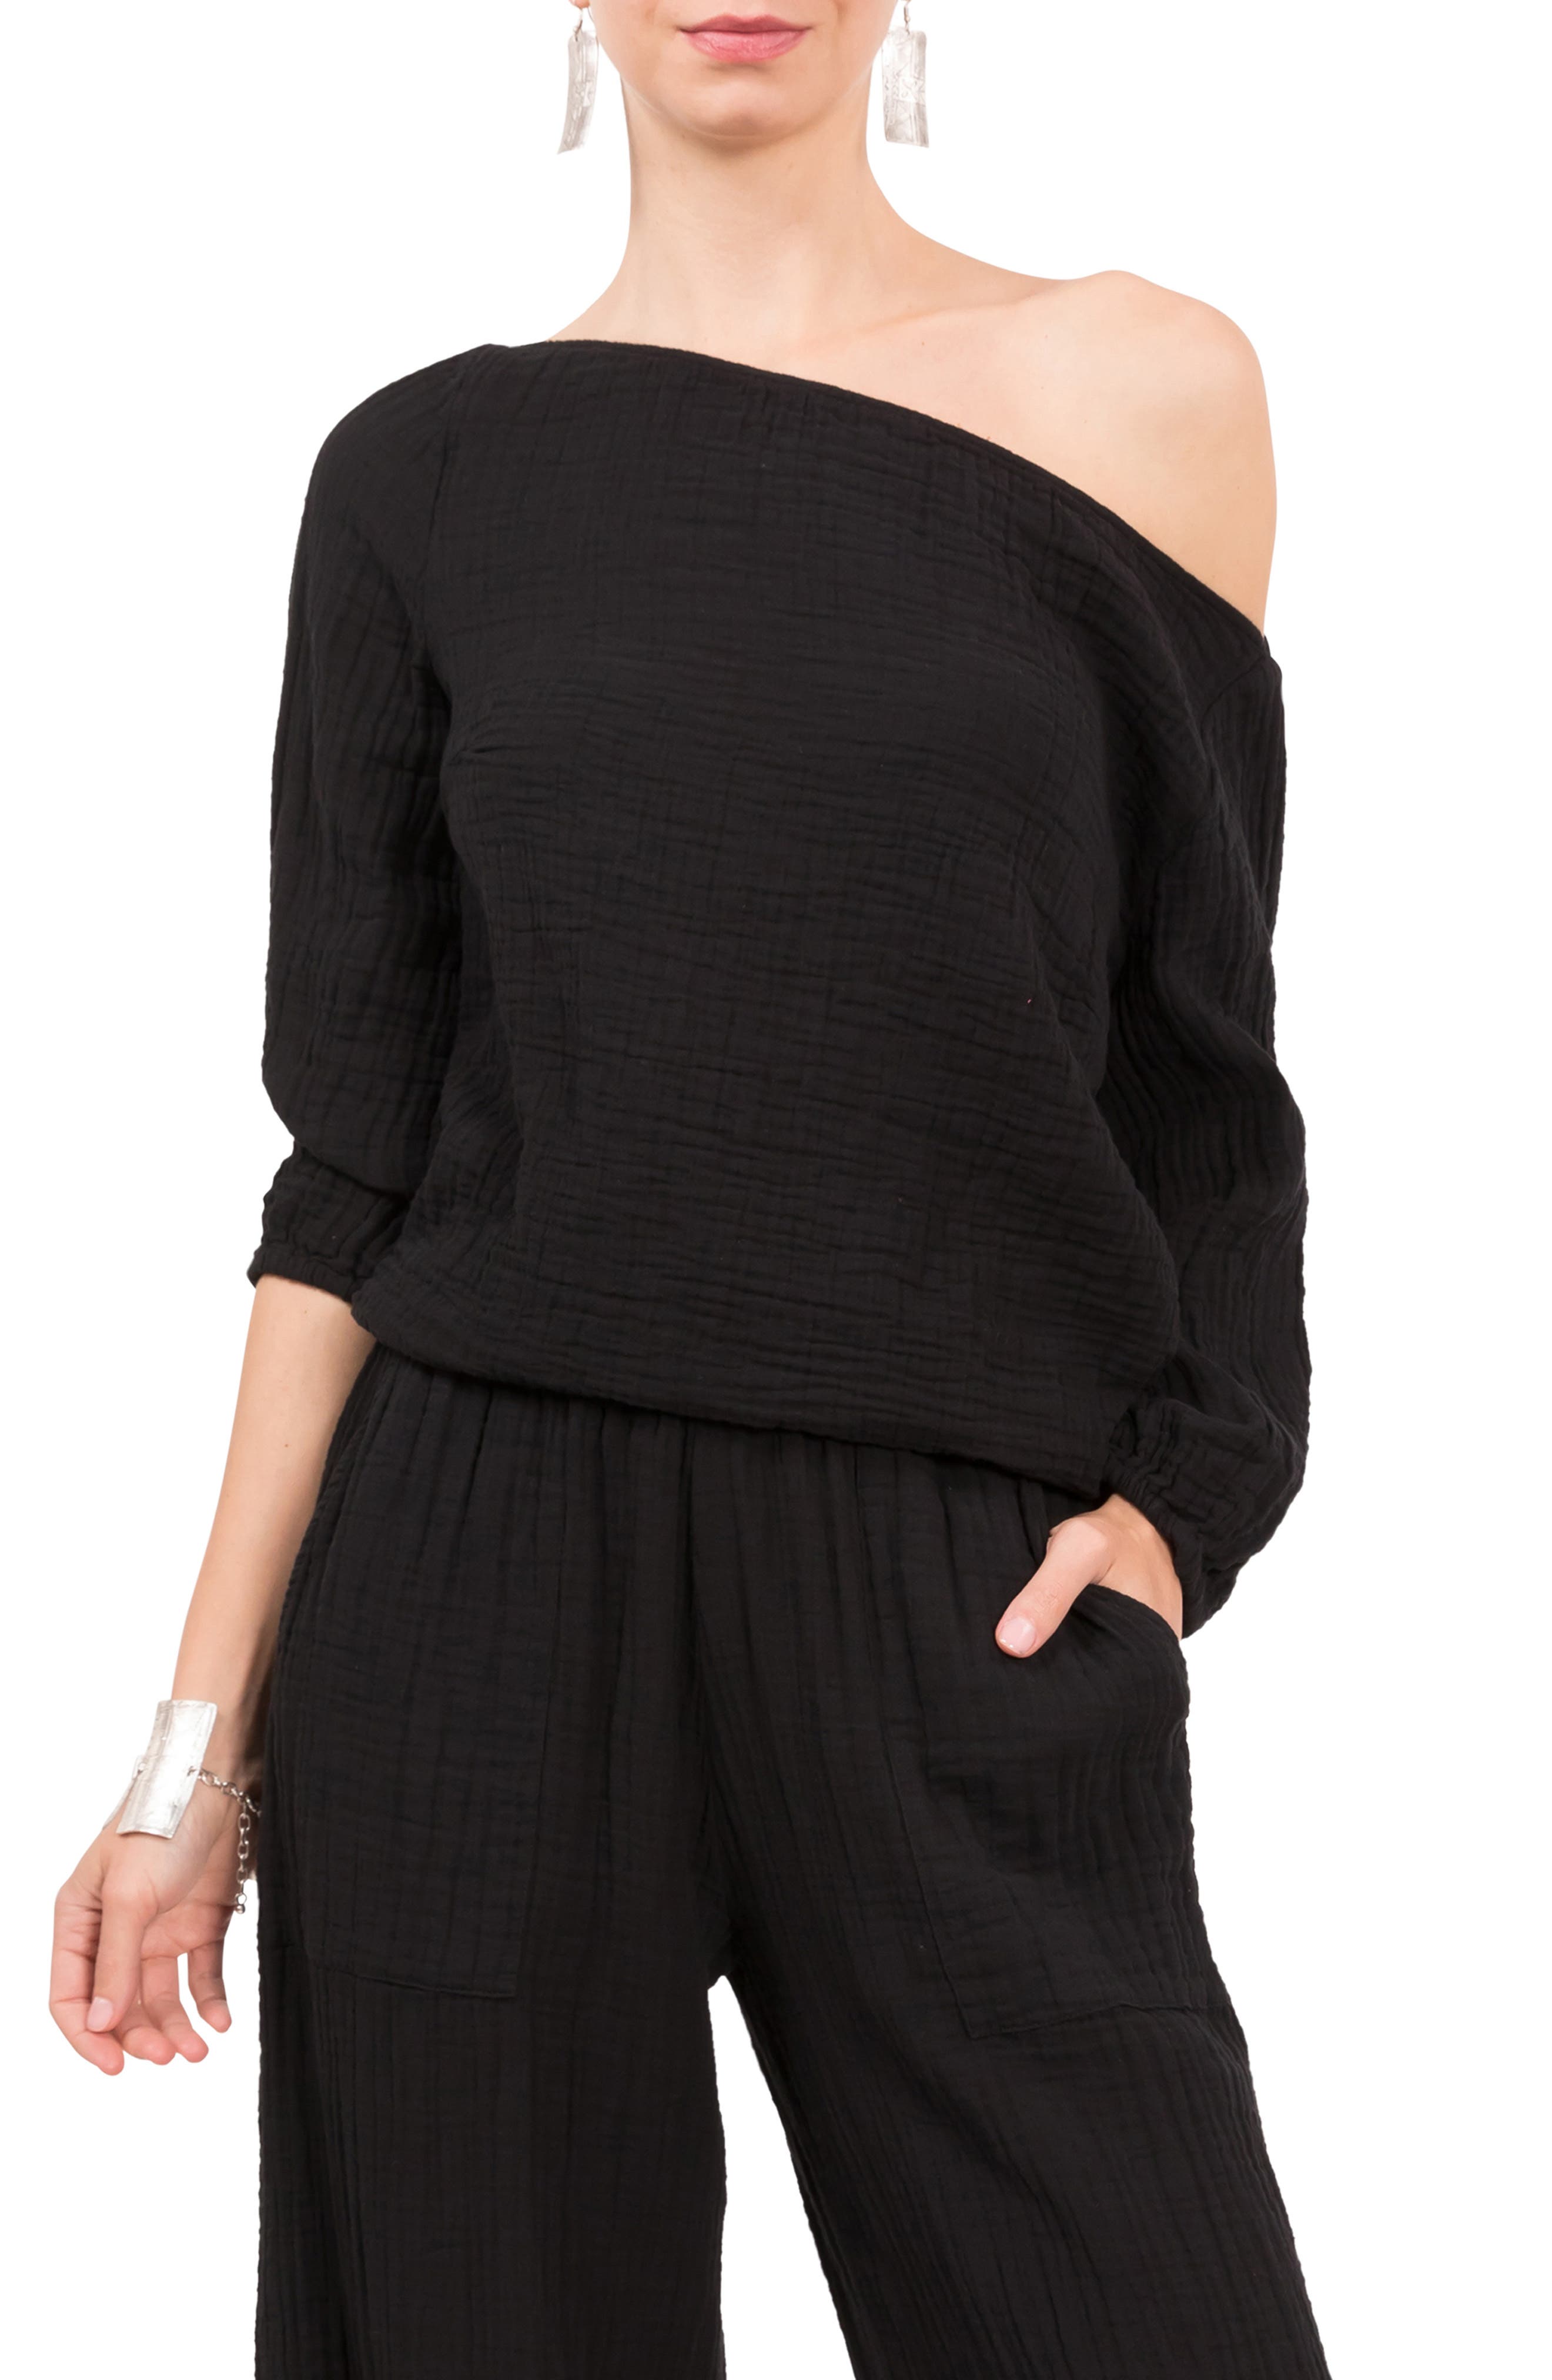 Everyday Ritual Penny Off the Shoulder Lounge Top in Black